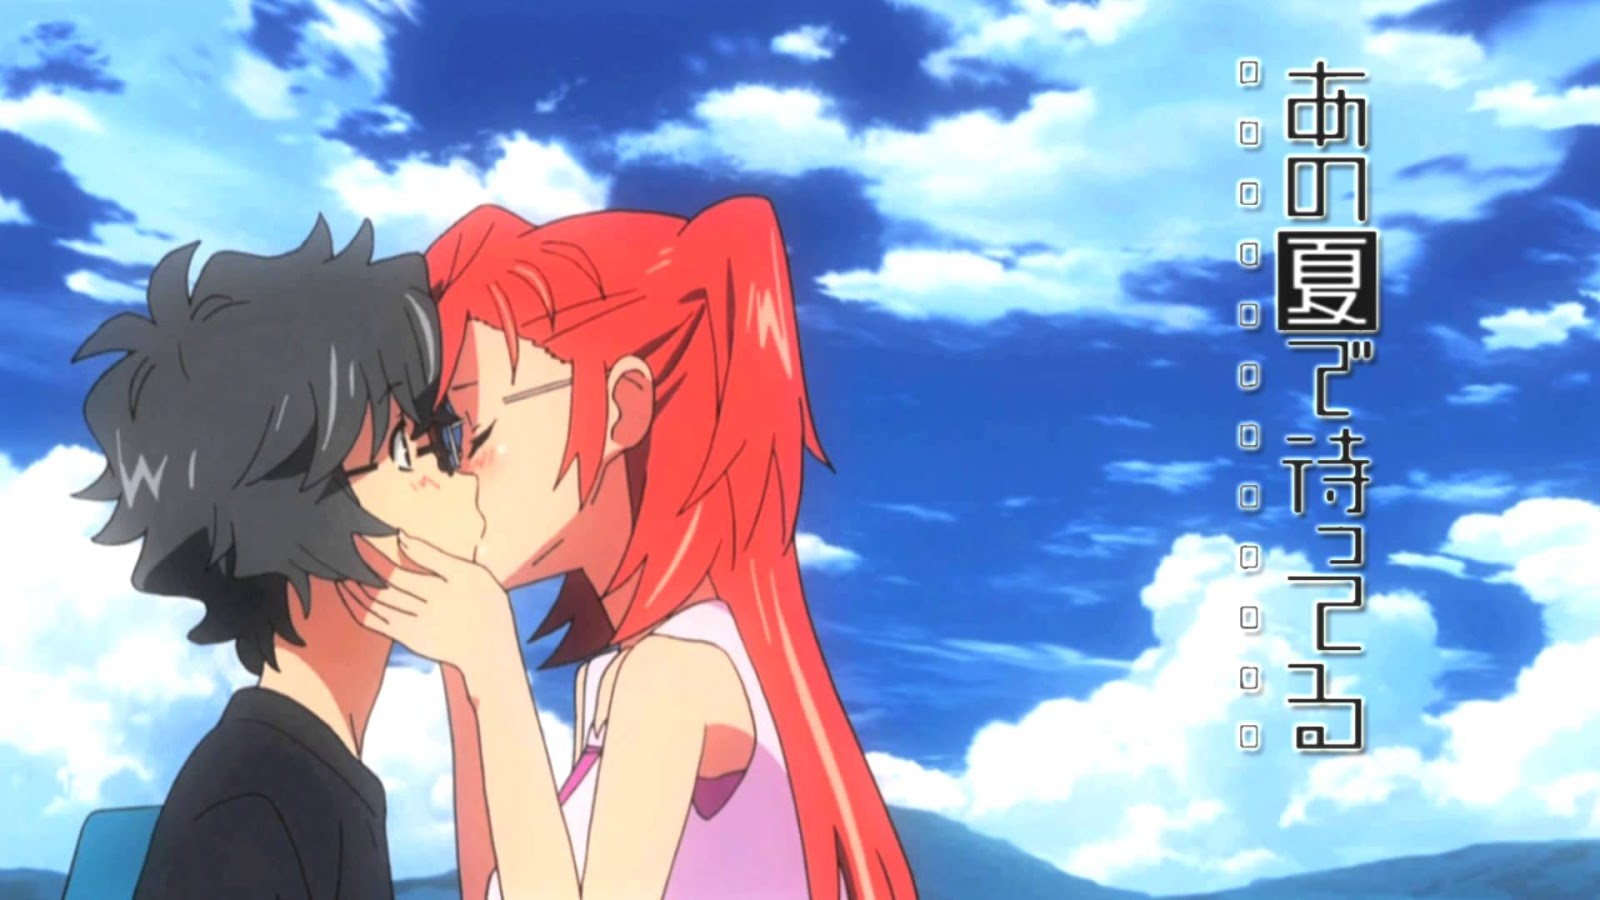 Our last Summer of high school, is spent waiting for that Summer: Ano Natsu  de Matteru OVA Review and Reflection